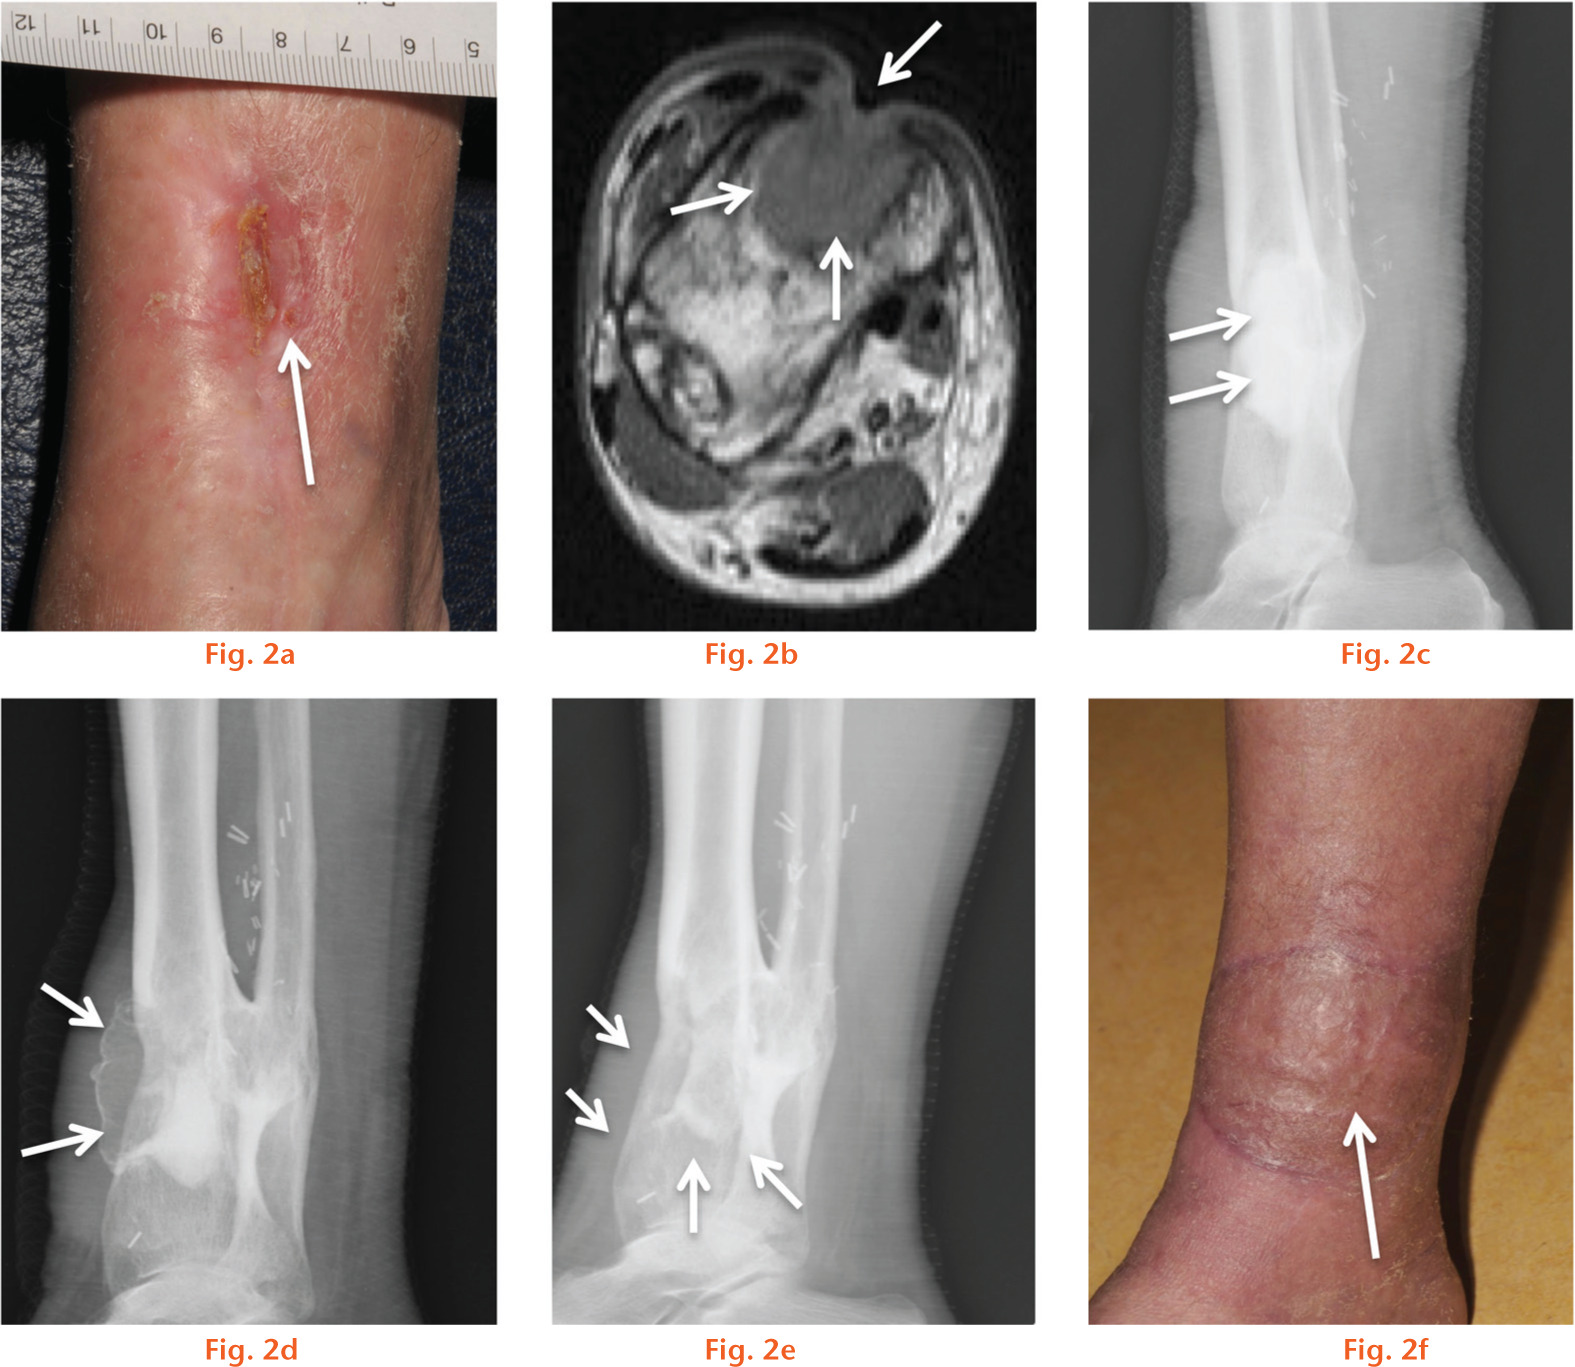  
            Time course observations from resected osteomyelitis treated with hydroxyapatite-calcium sulphate-gentamicin (HA-CS-G) biomaterial. Panel (a) is a digital image of the chronic osteomyelitis area of the tibia with visible wound as indicated by the arrow. Panel (b) represents a pre-operative MRI image used for diagnosis of osteomyelitis with white arrows emphasising the infected area. Radiograph in panel (c) represents the infected area filled with 10 ml of HA-CS-G post-operatively as indicated by white arrows while arrows in panel (d) indicate mineralisation in the overlaying muscle flap, four weeks post-operatively. Panel (e) represents a radiograph taken seven months post-operatively with arrows representing the resorbed bone previously observed at four weeks, while panel (f) represents a digital image of the healed wound seven months post-operatively.
          